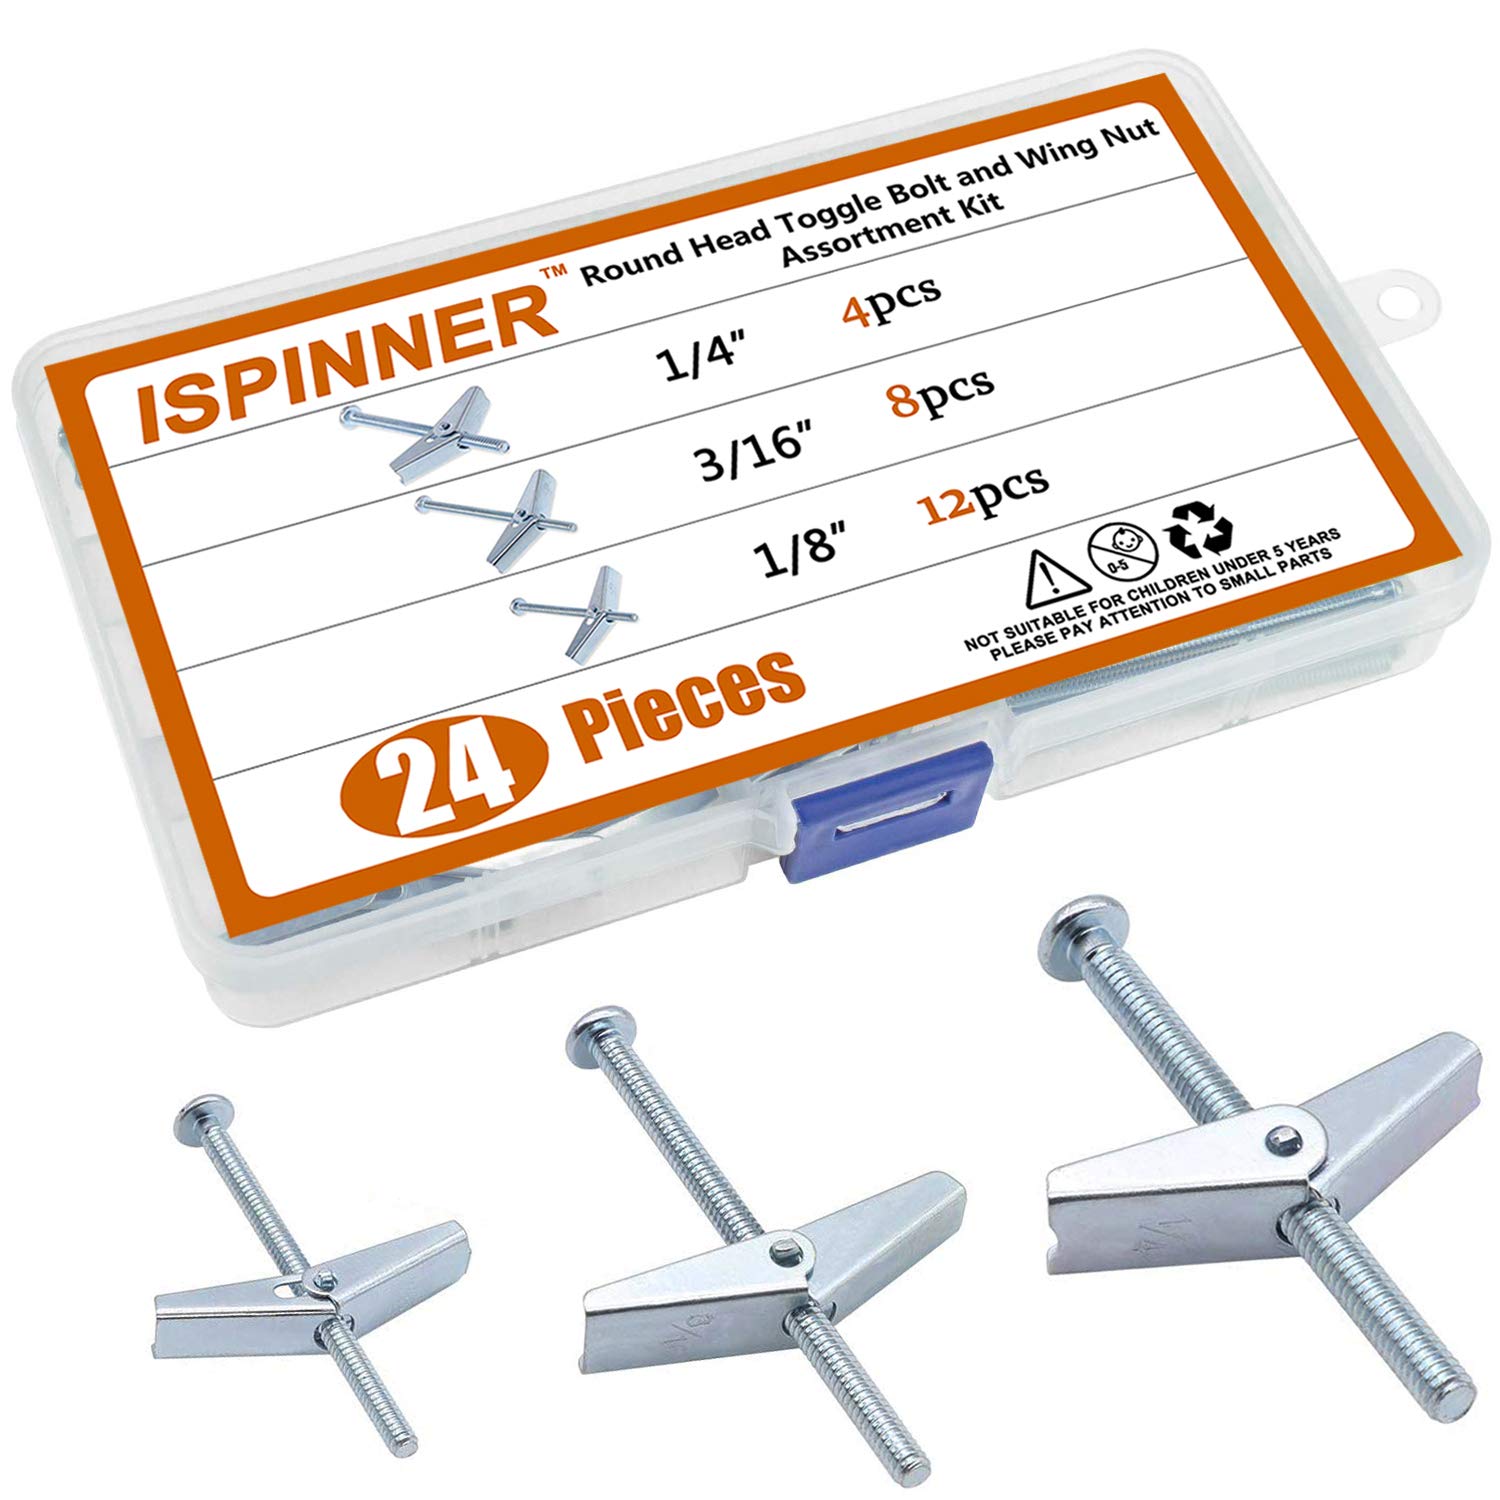 ISPINNER 24pcs Toggle Bolt and Wing Nut Assortment Kit [...]